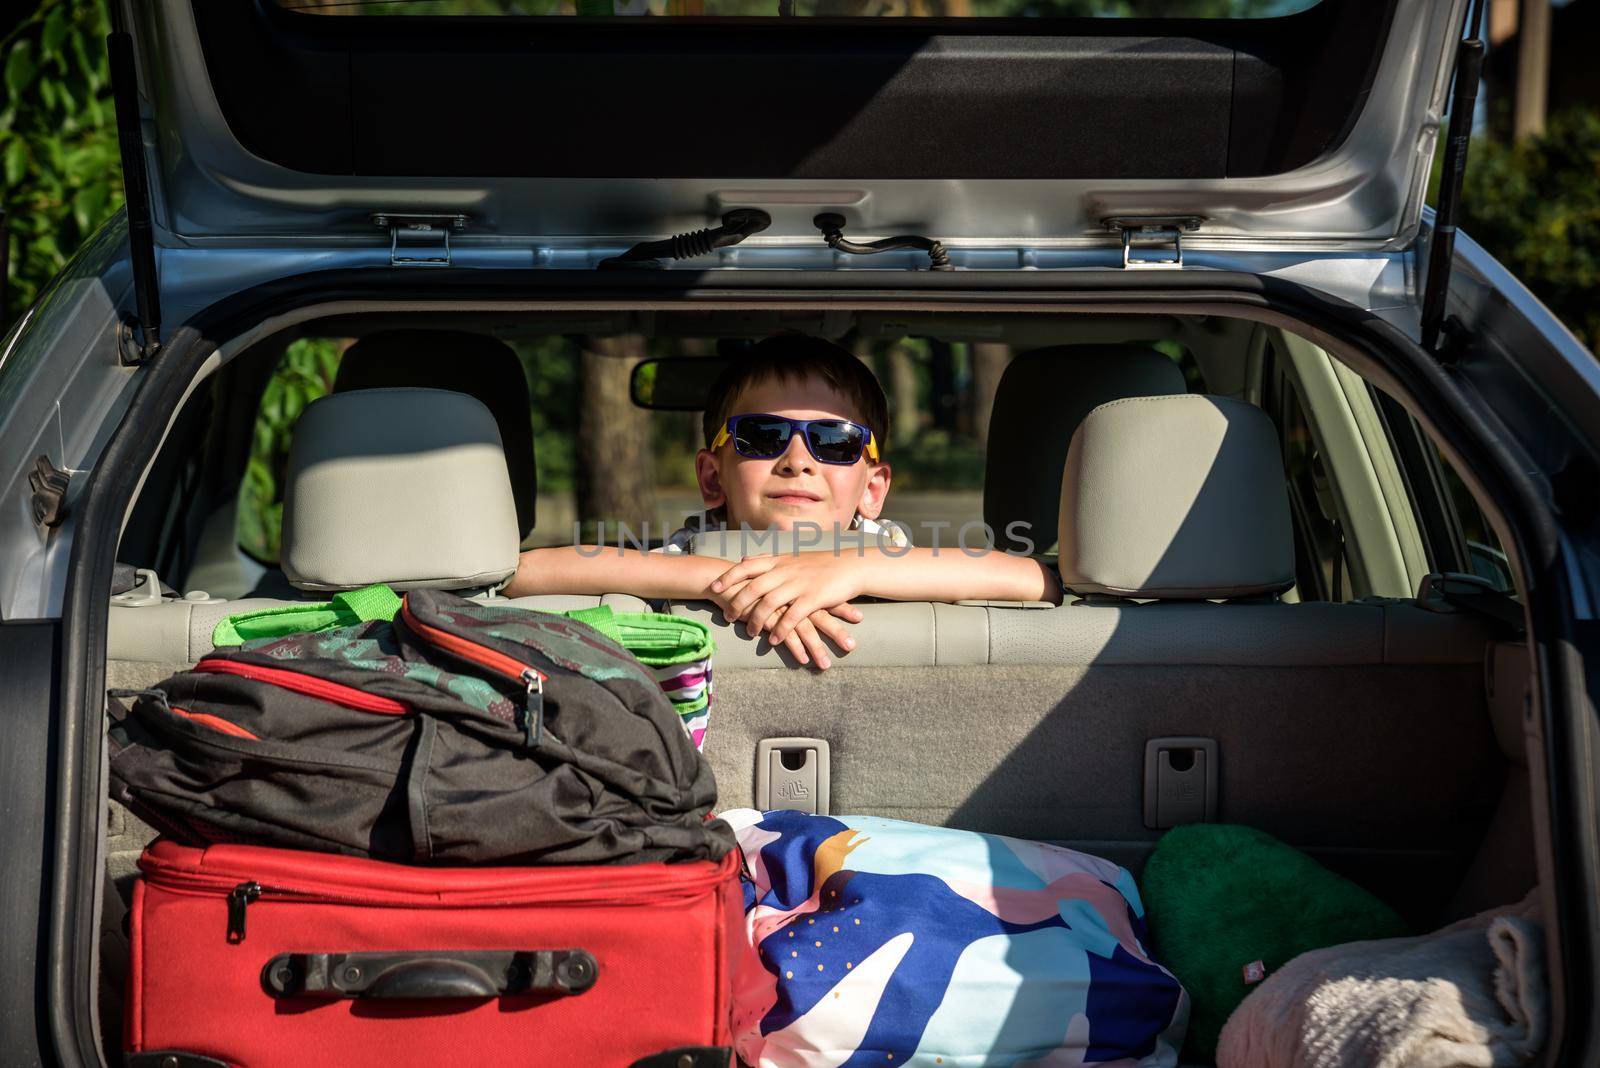 Adorable kid boy wearing sunglasses sitting in car trunk. Portrait of Happy child with open car boot while waiting for parent get ready for vocation. Family trip traveling by car concept by Kobysh